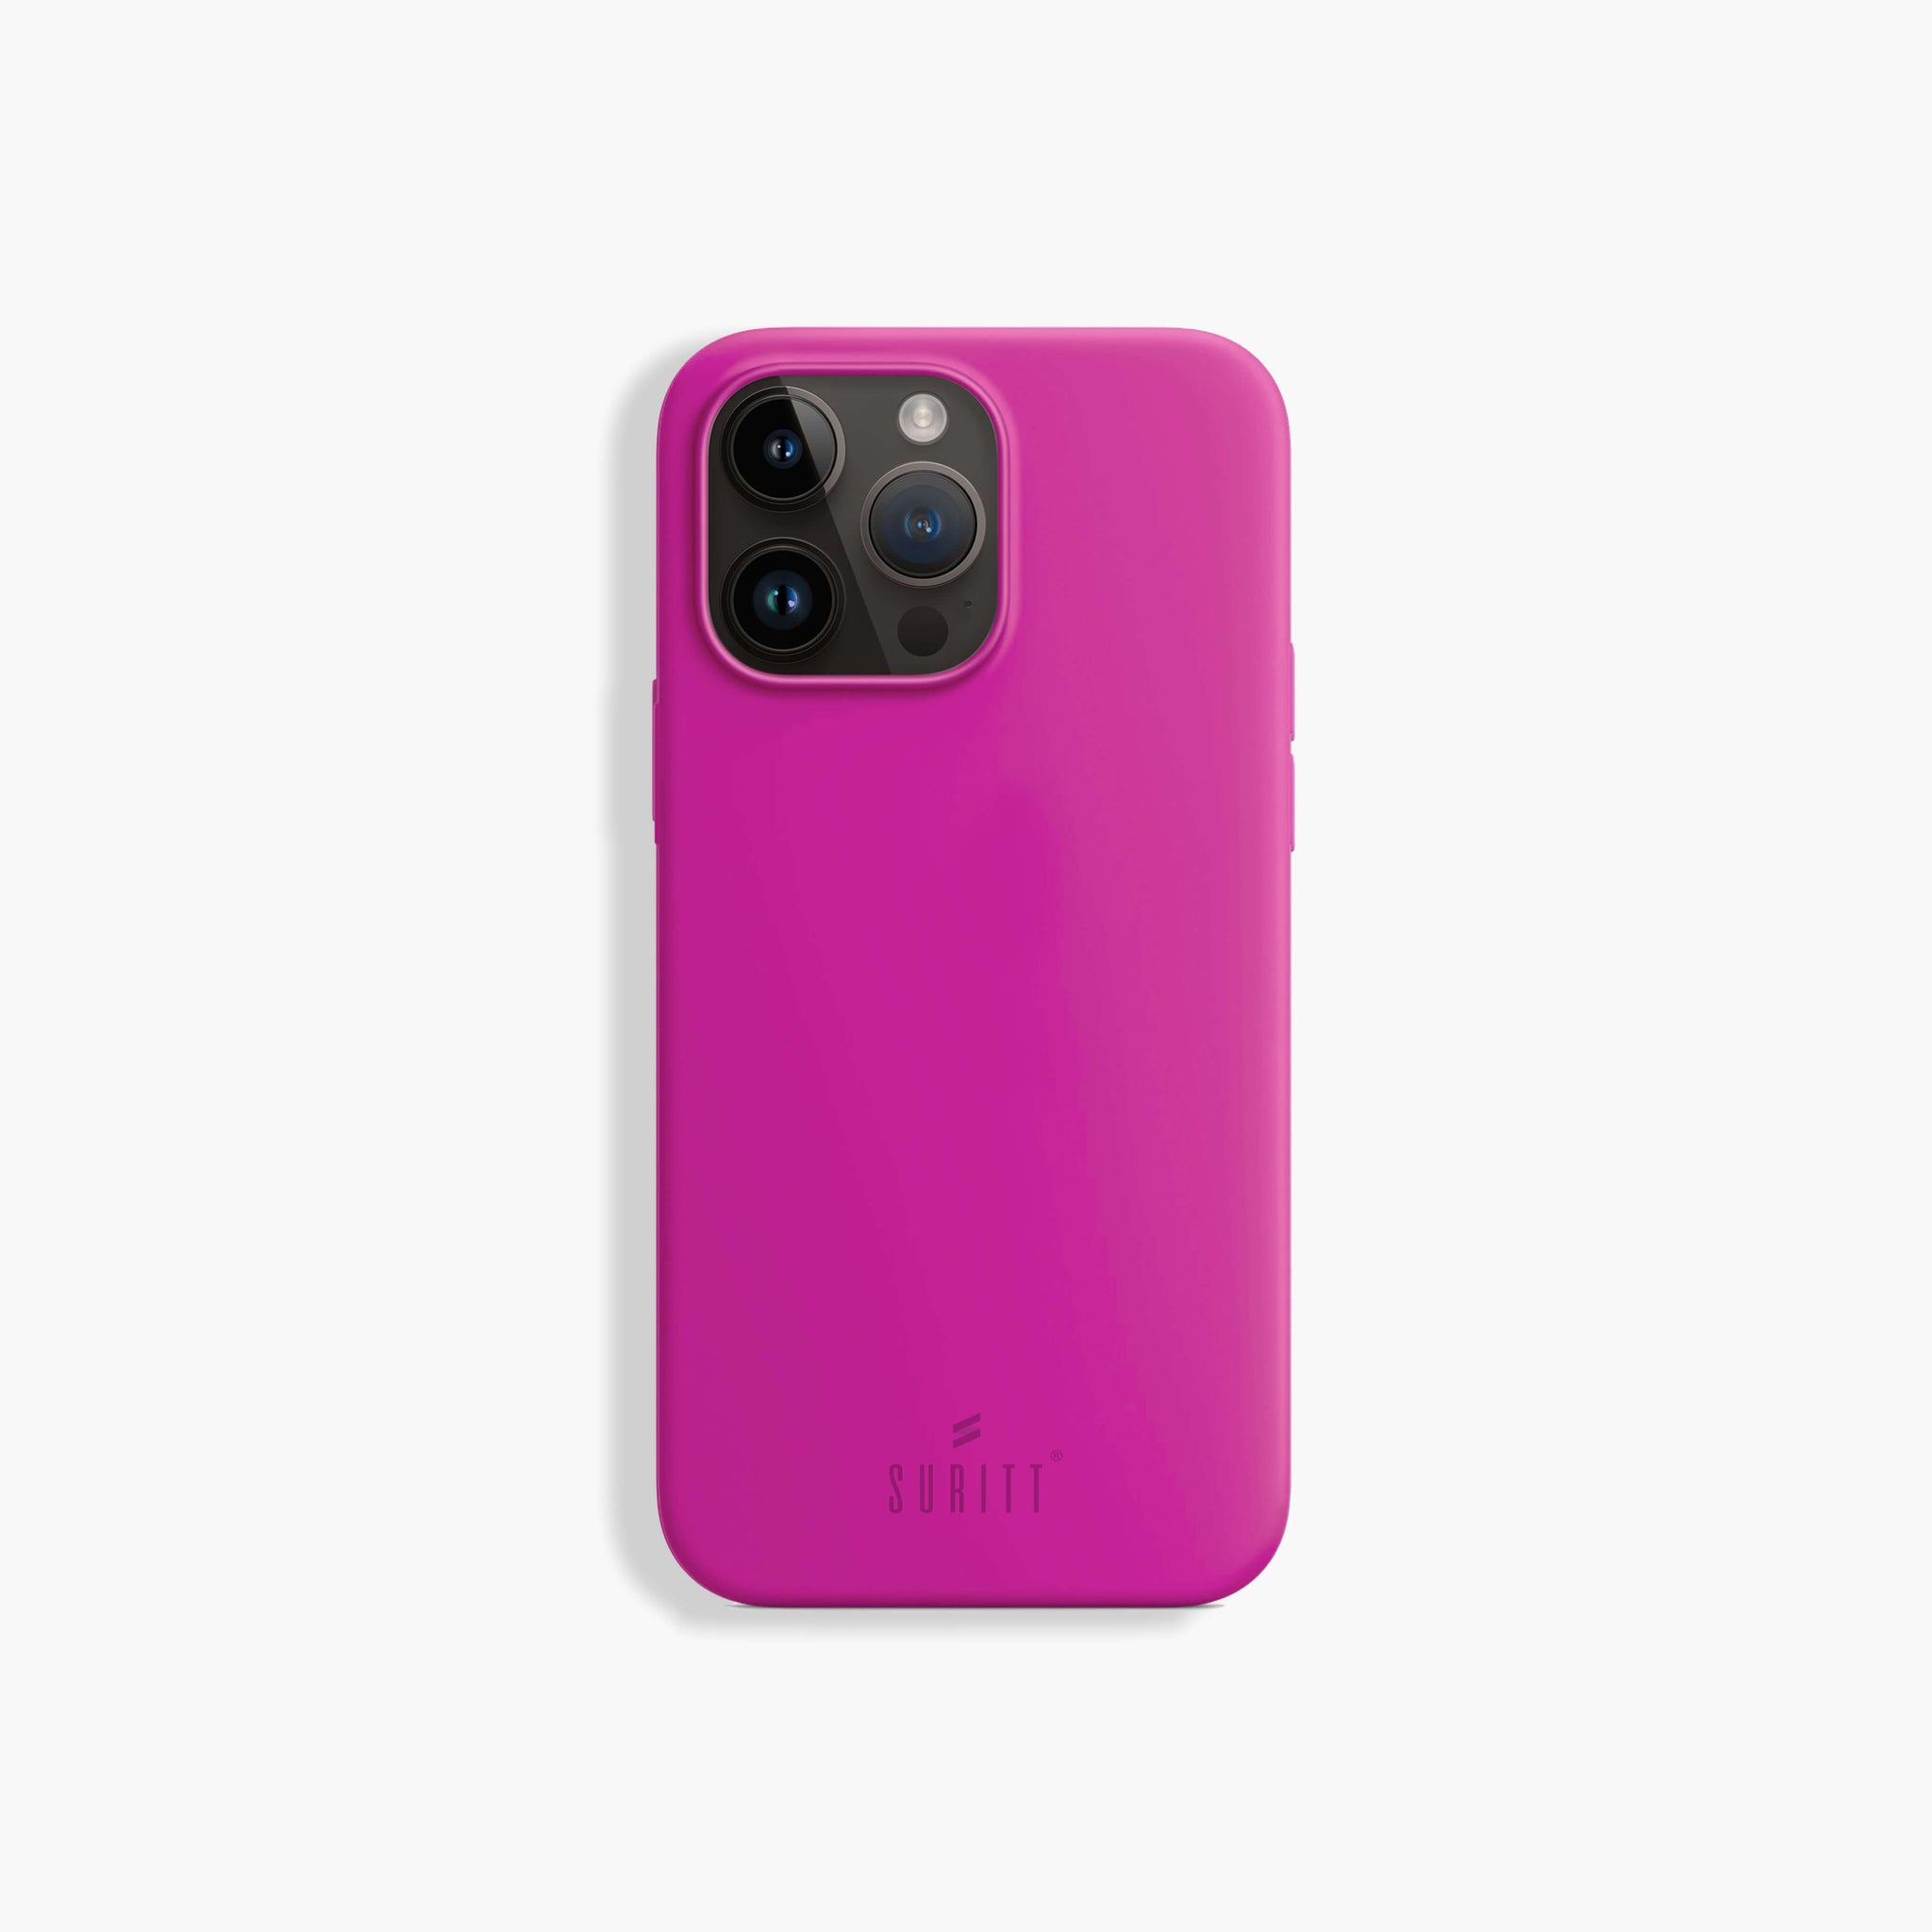 iPhone Coque Silicone Pink PP